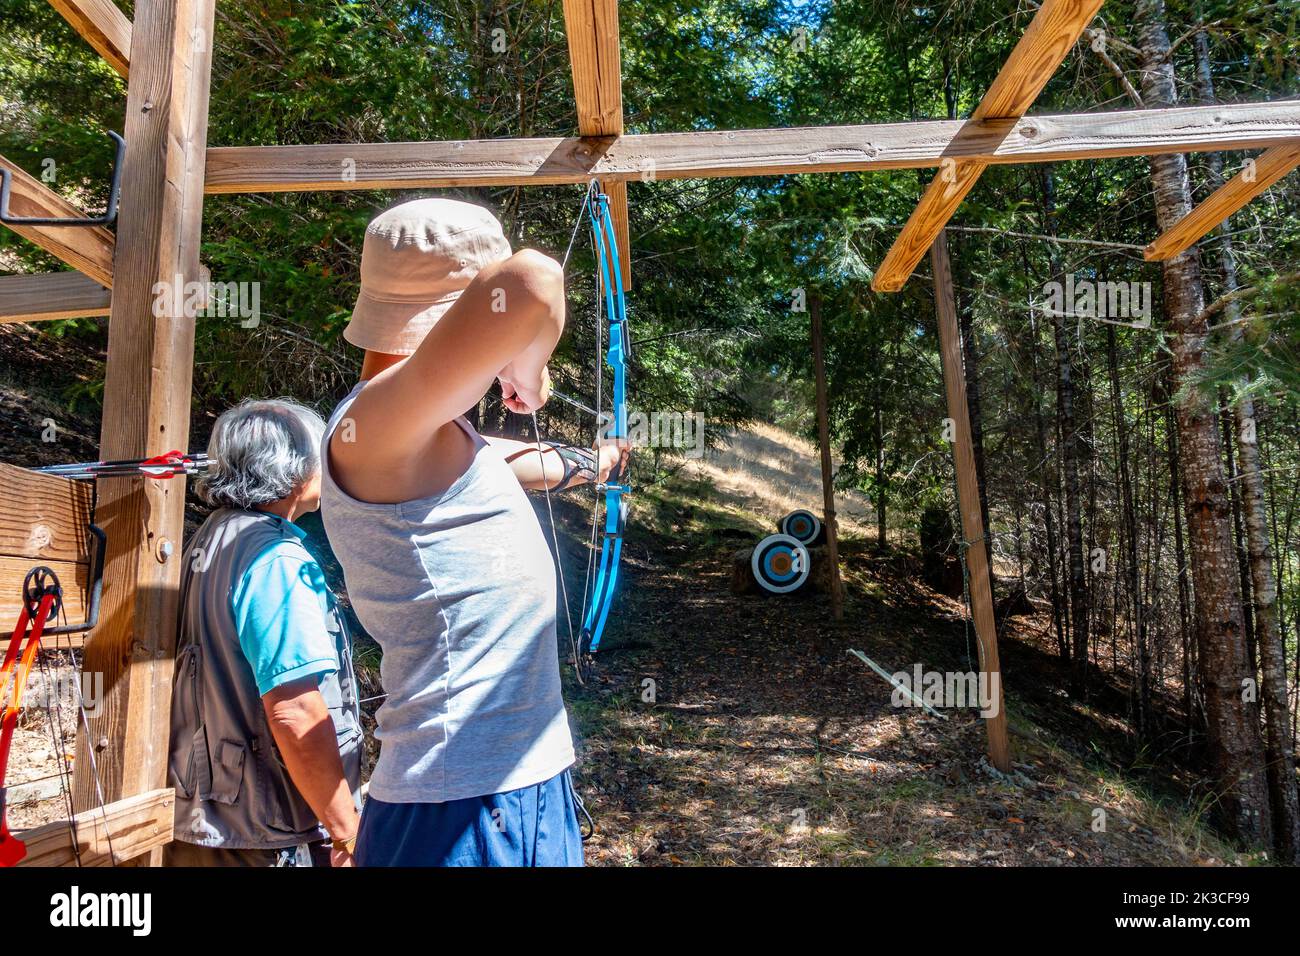 A boy trying archery, aiming an arrow at a target, bow drawn. Stock Photo